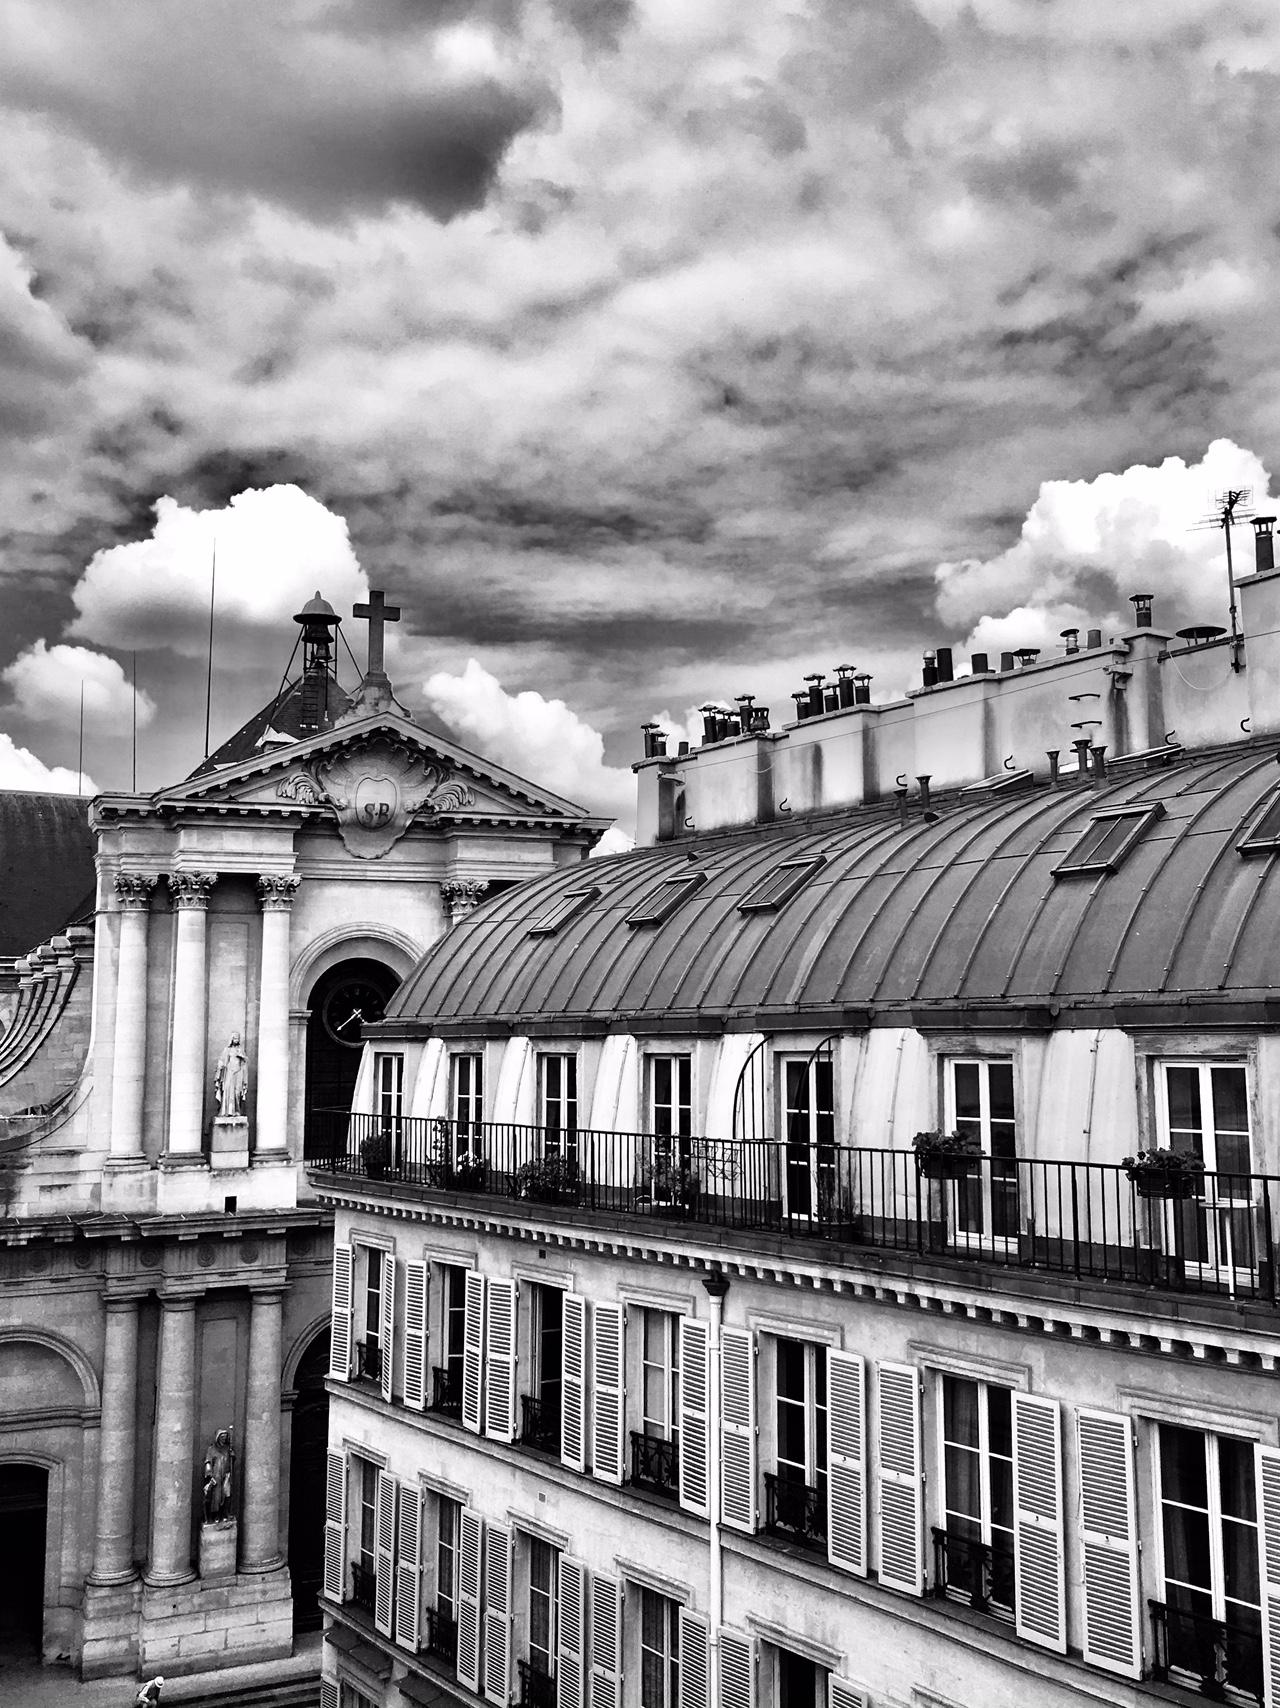 James Bacchi Black and White Photograph - #InTheSky A Weekend in Paris #1